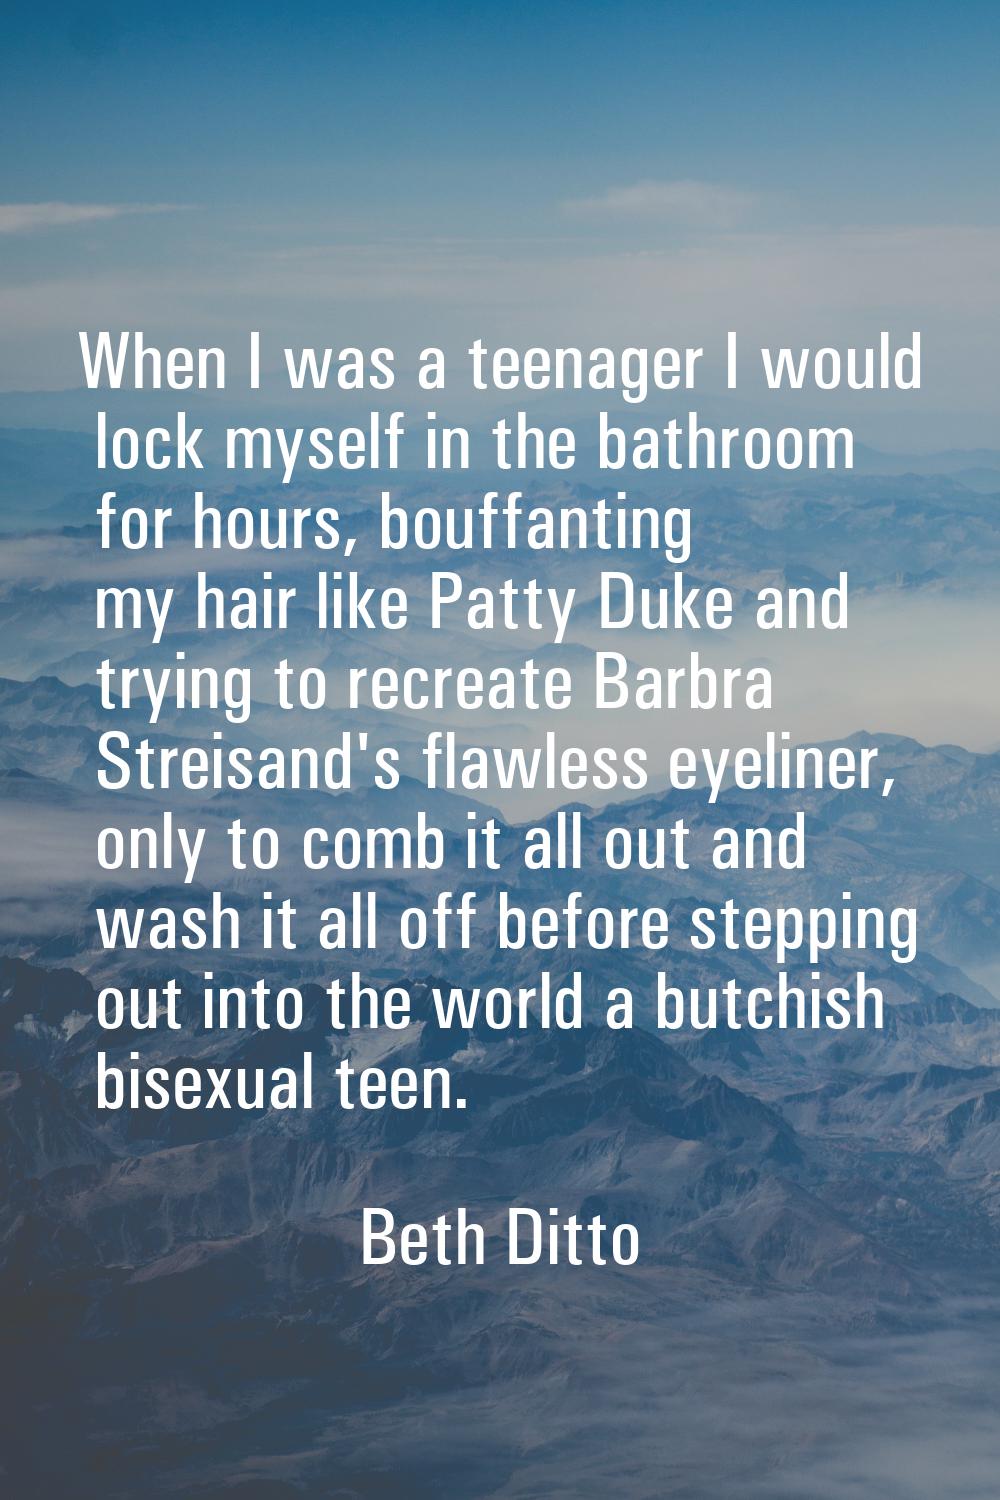 When I was a teenager I would lock myself in the bathroom for hours, bouffanting my hair like Patty